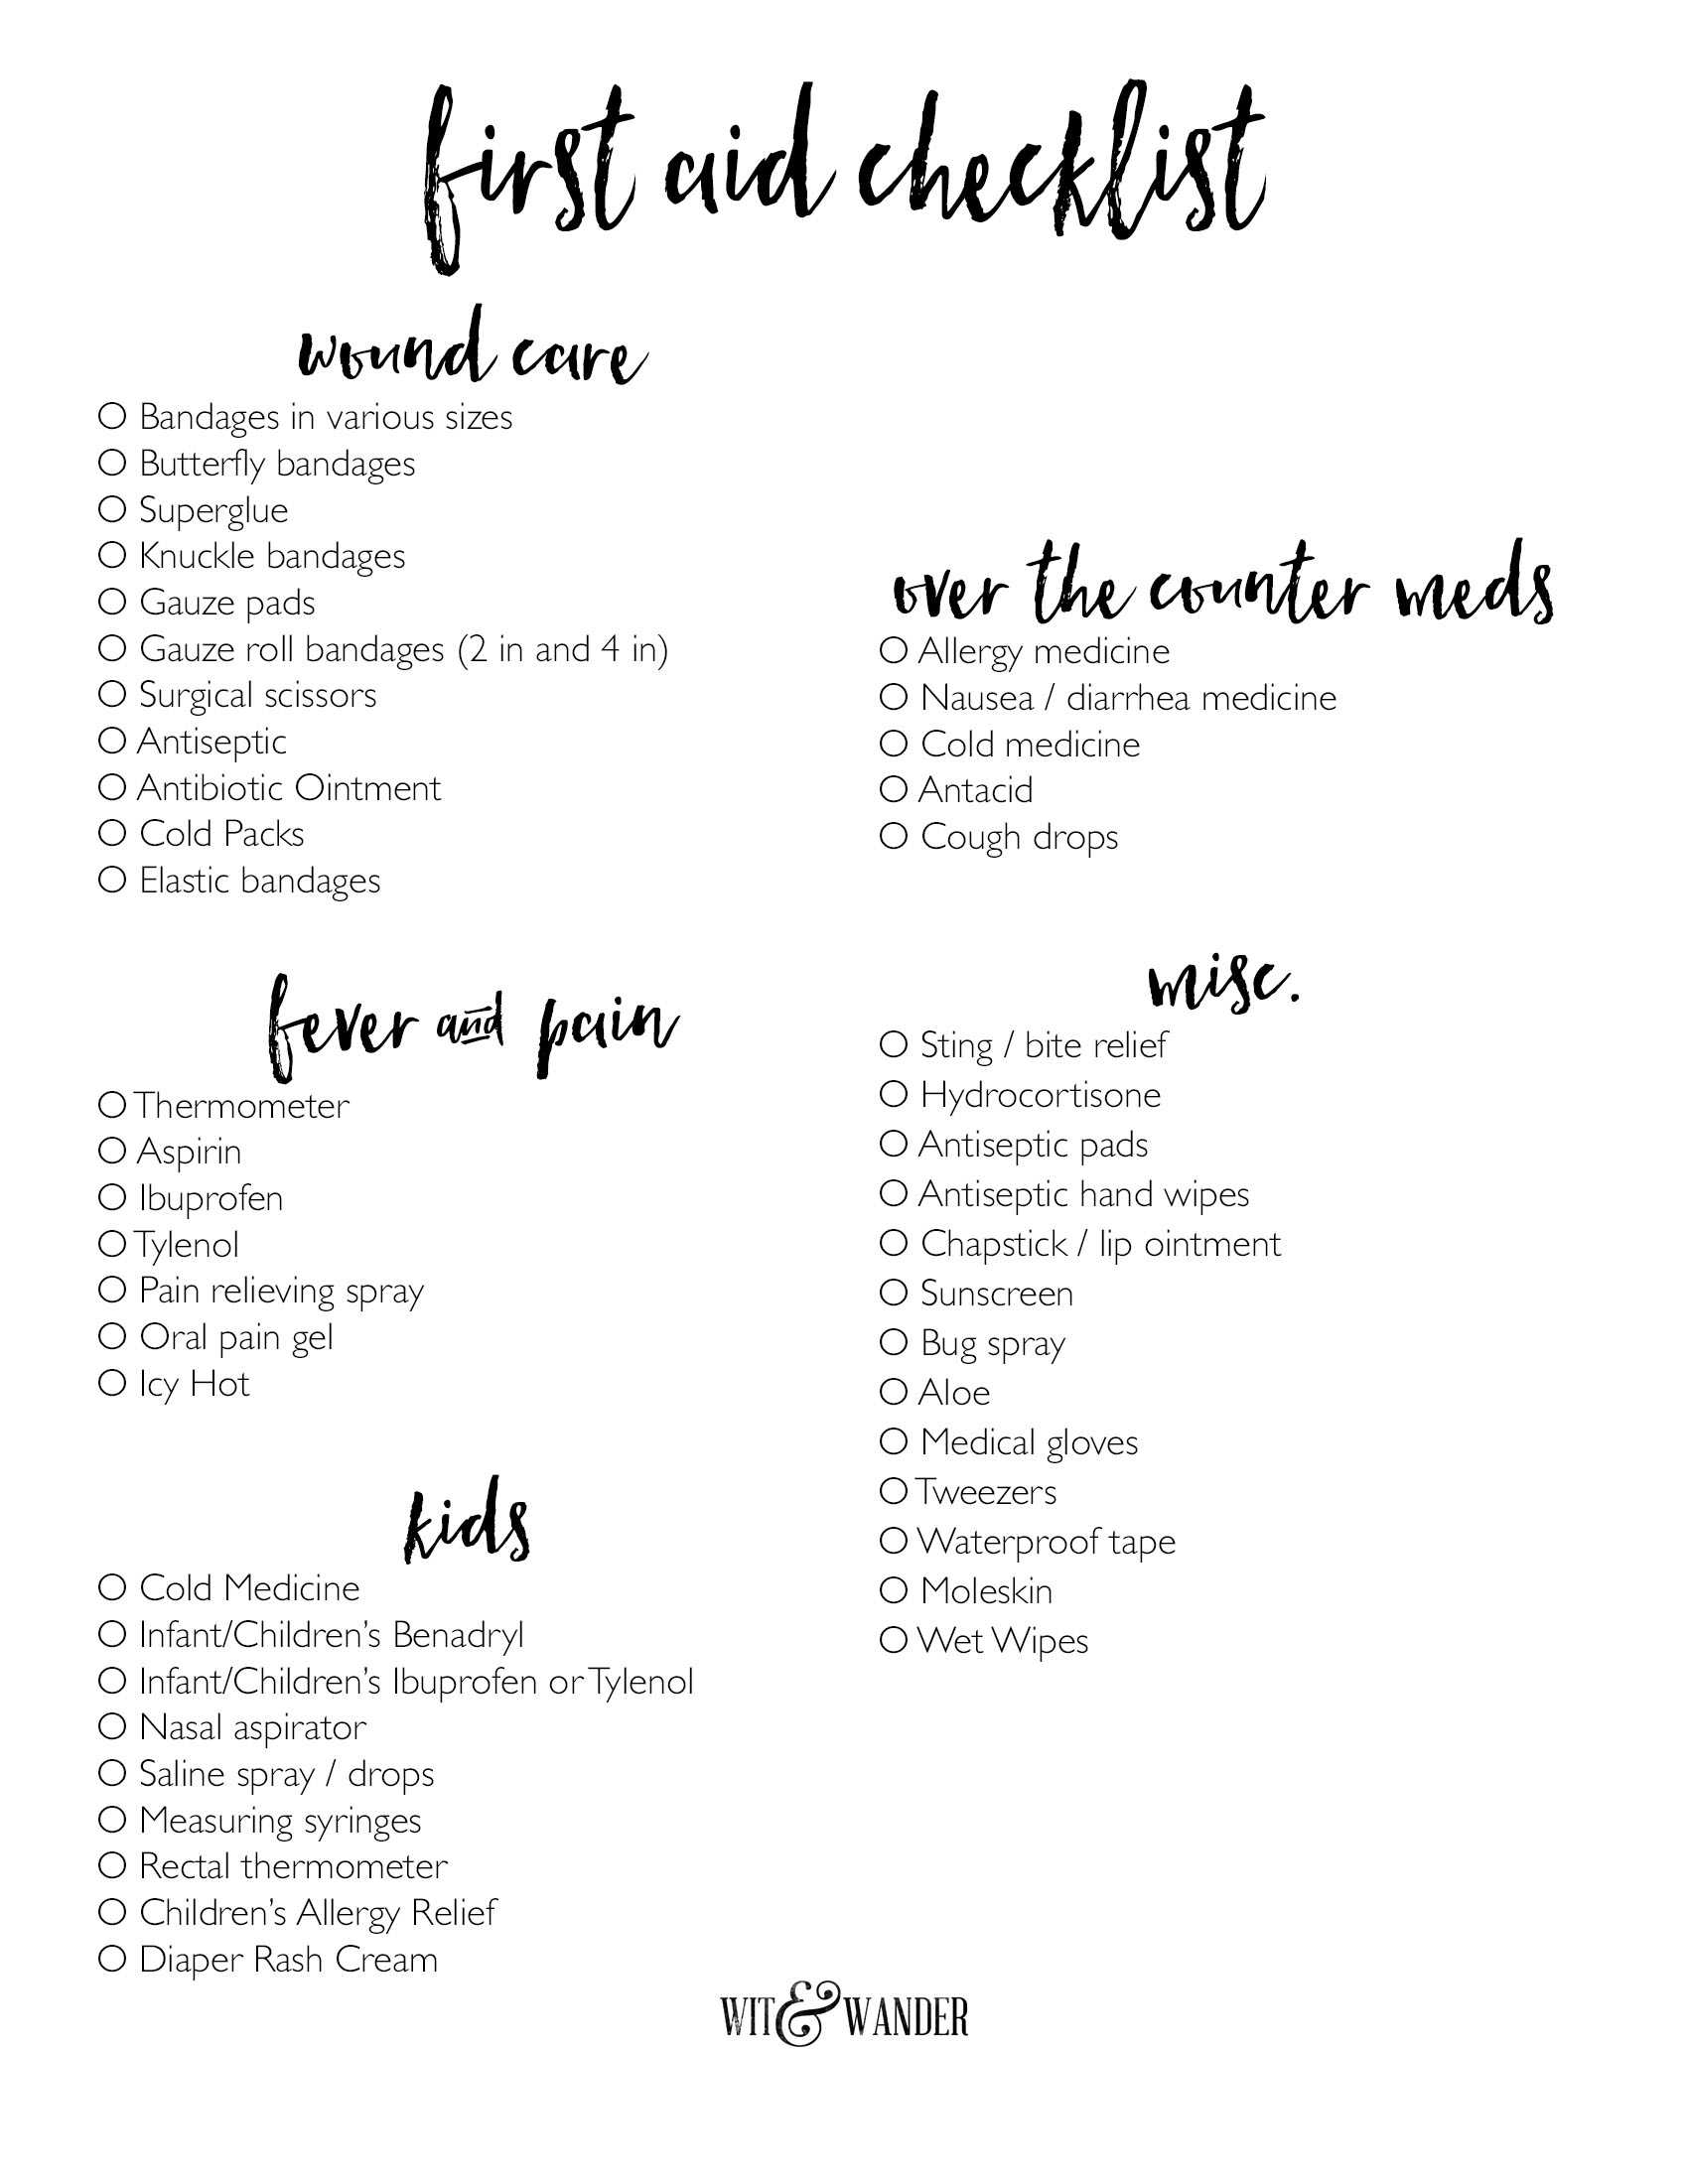 Free Printable First Aid Kit Checklist - Our Handcrafted Life